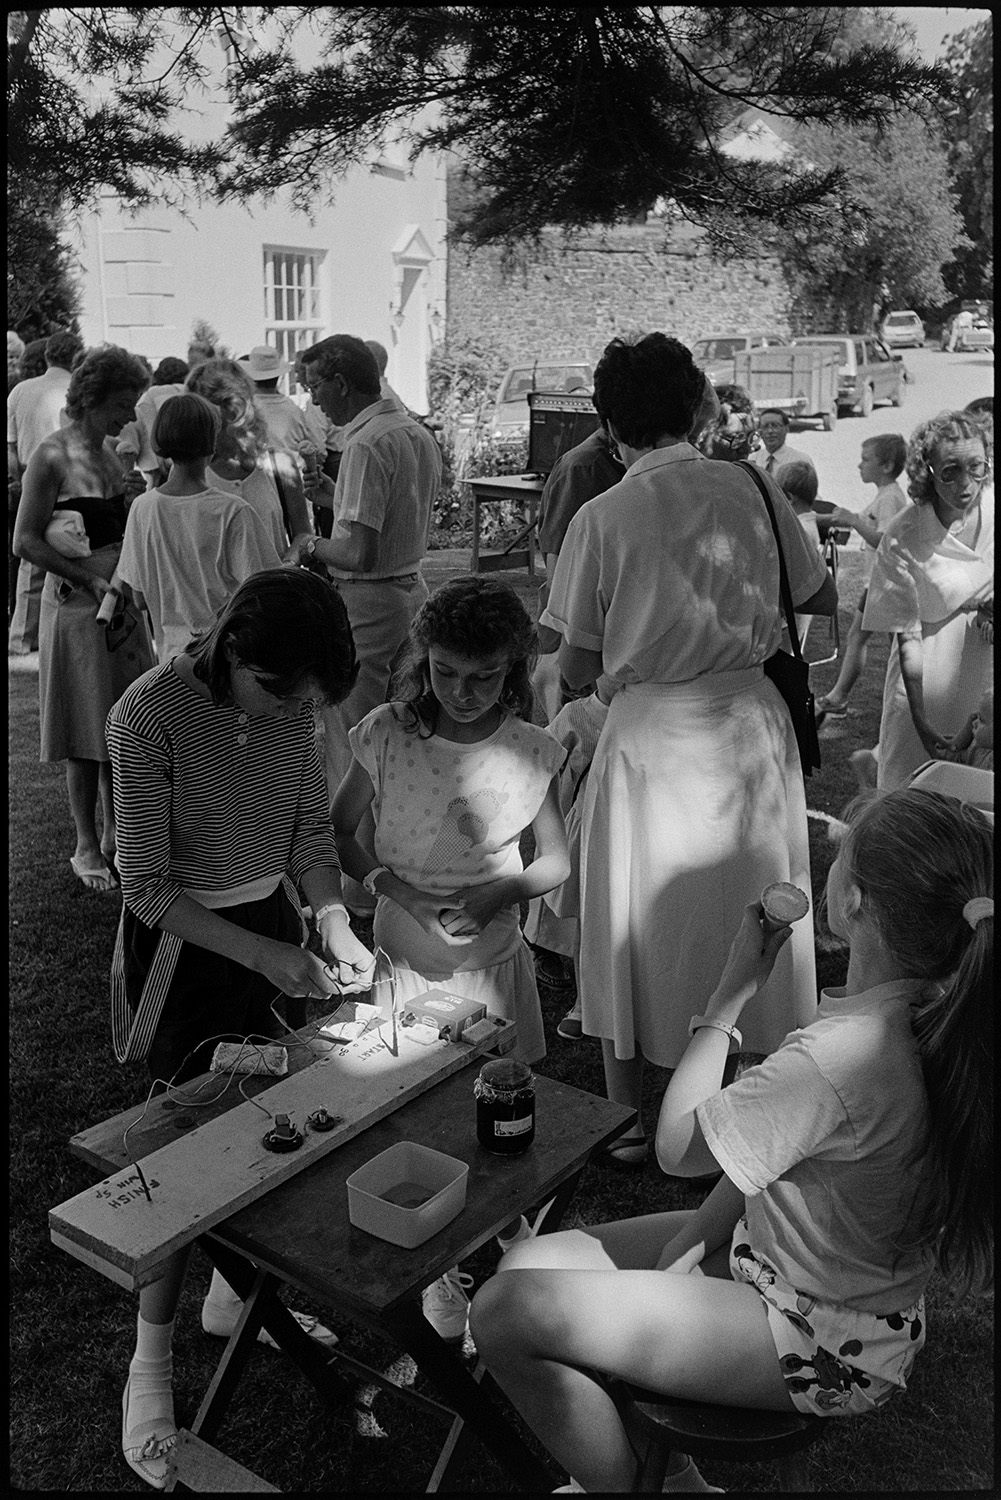 Vicarage garden fete, women spectators, games, dancing, man playing keyboard. Chatting!! 
[Children having a go on a buzzer game at Kings Nympton vicarage fete. A girl running the stall is eating an ice cream and other visitors to the fete can be seen in the background.]